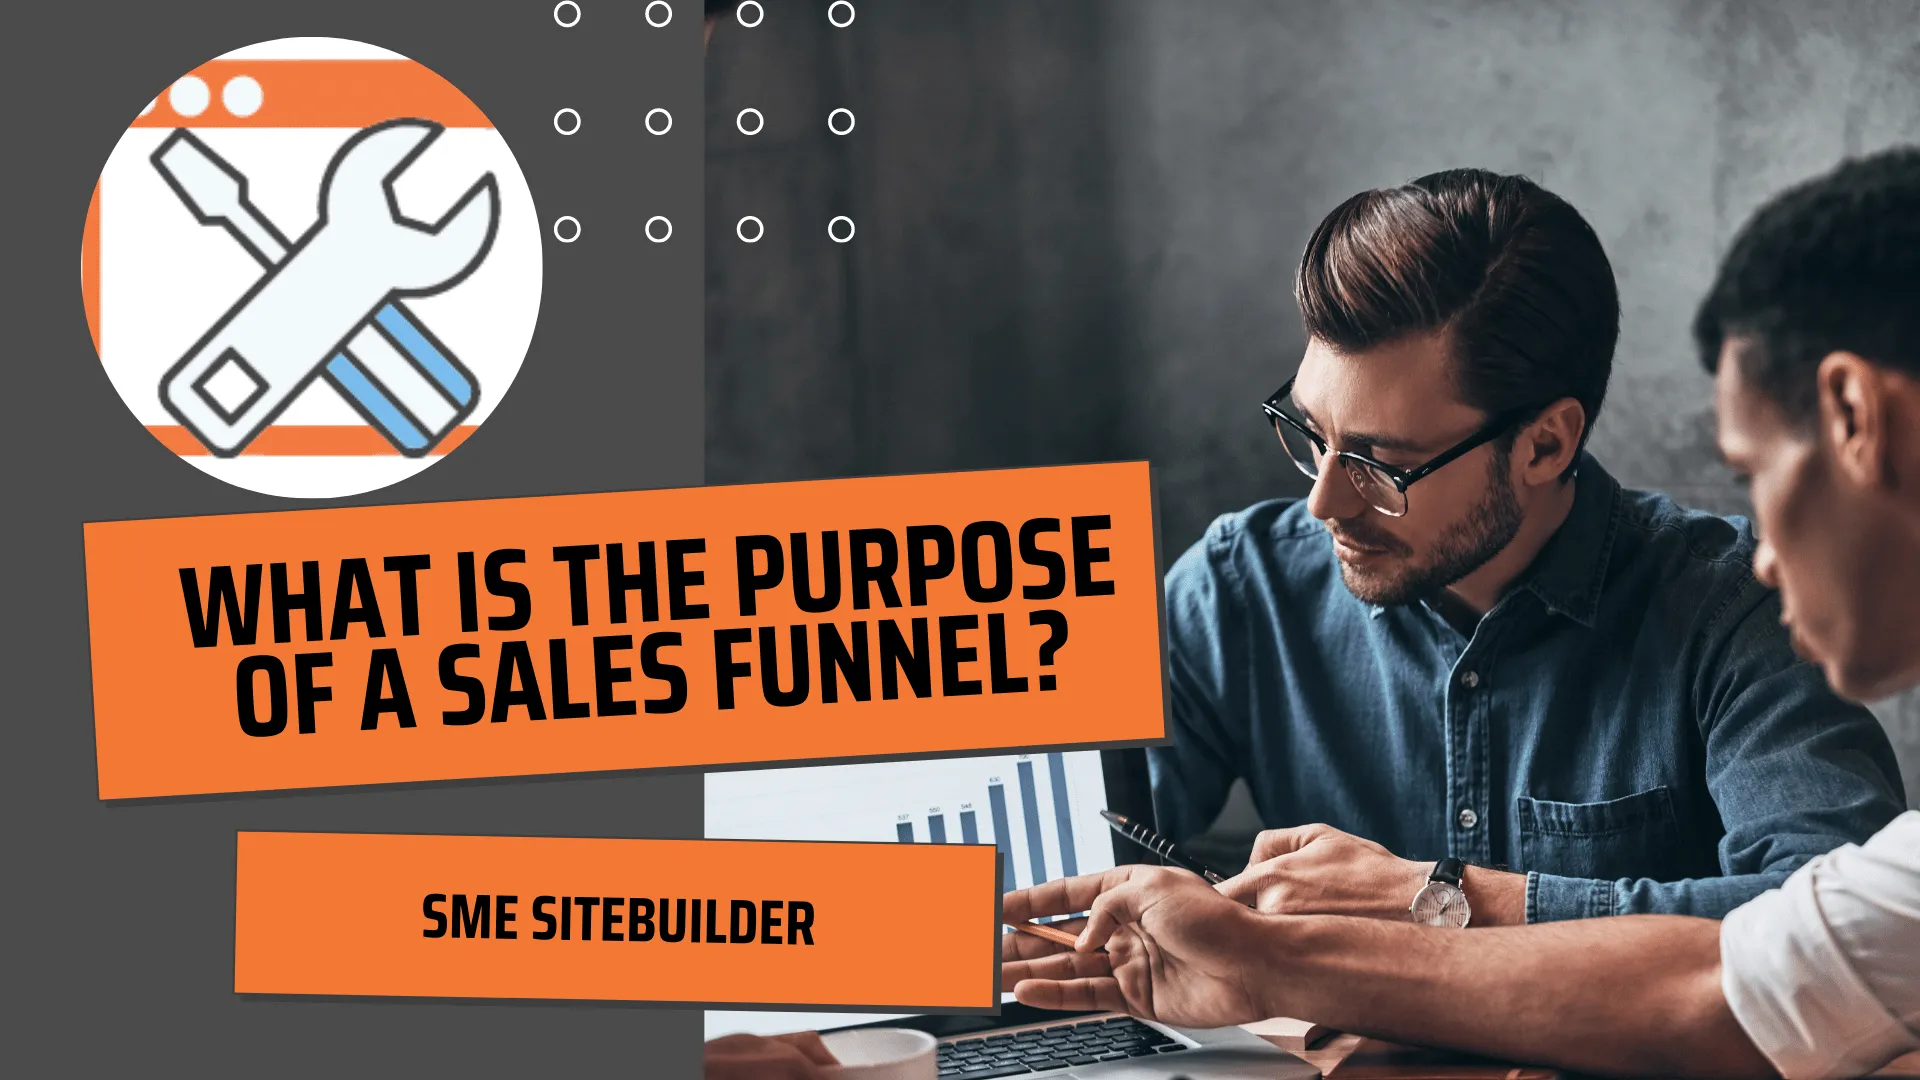 What is the purpose of a sales funnel?